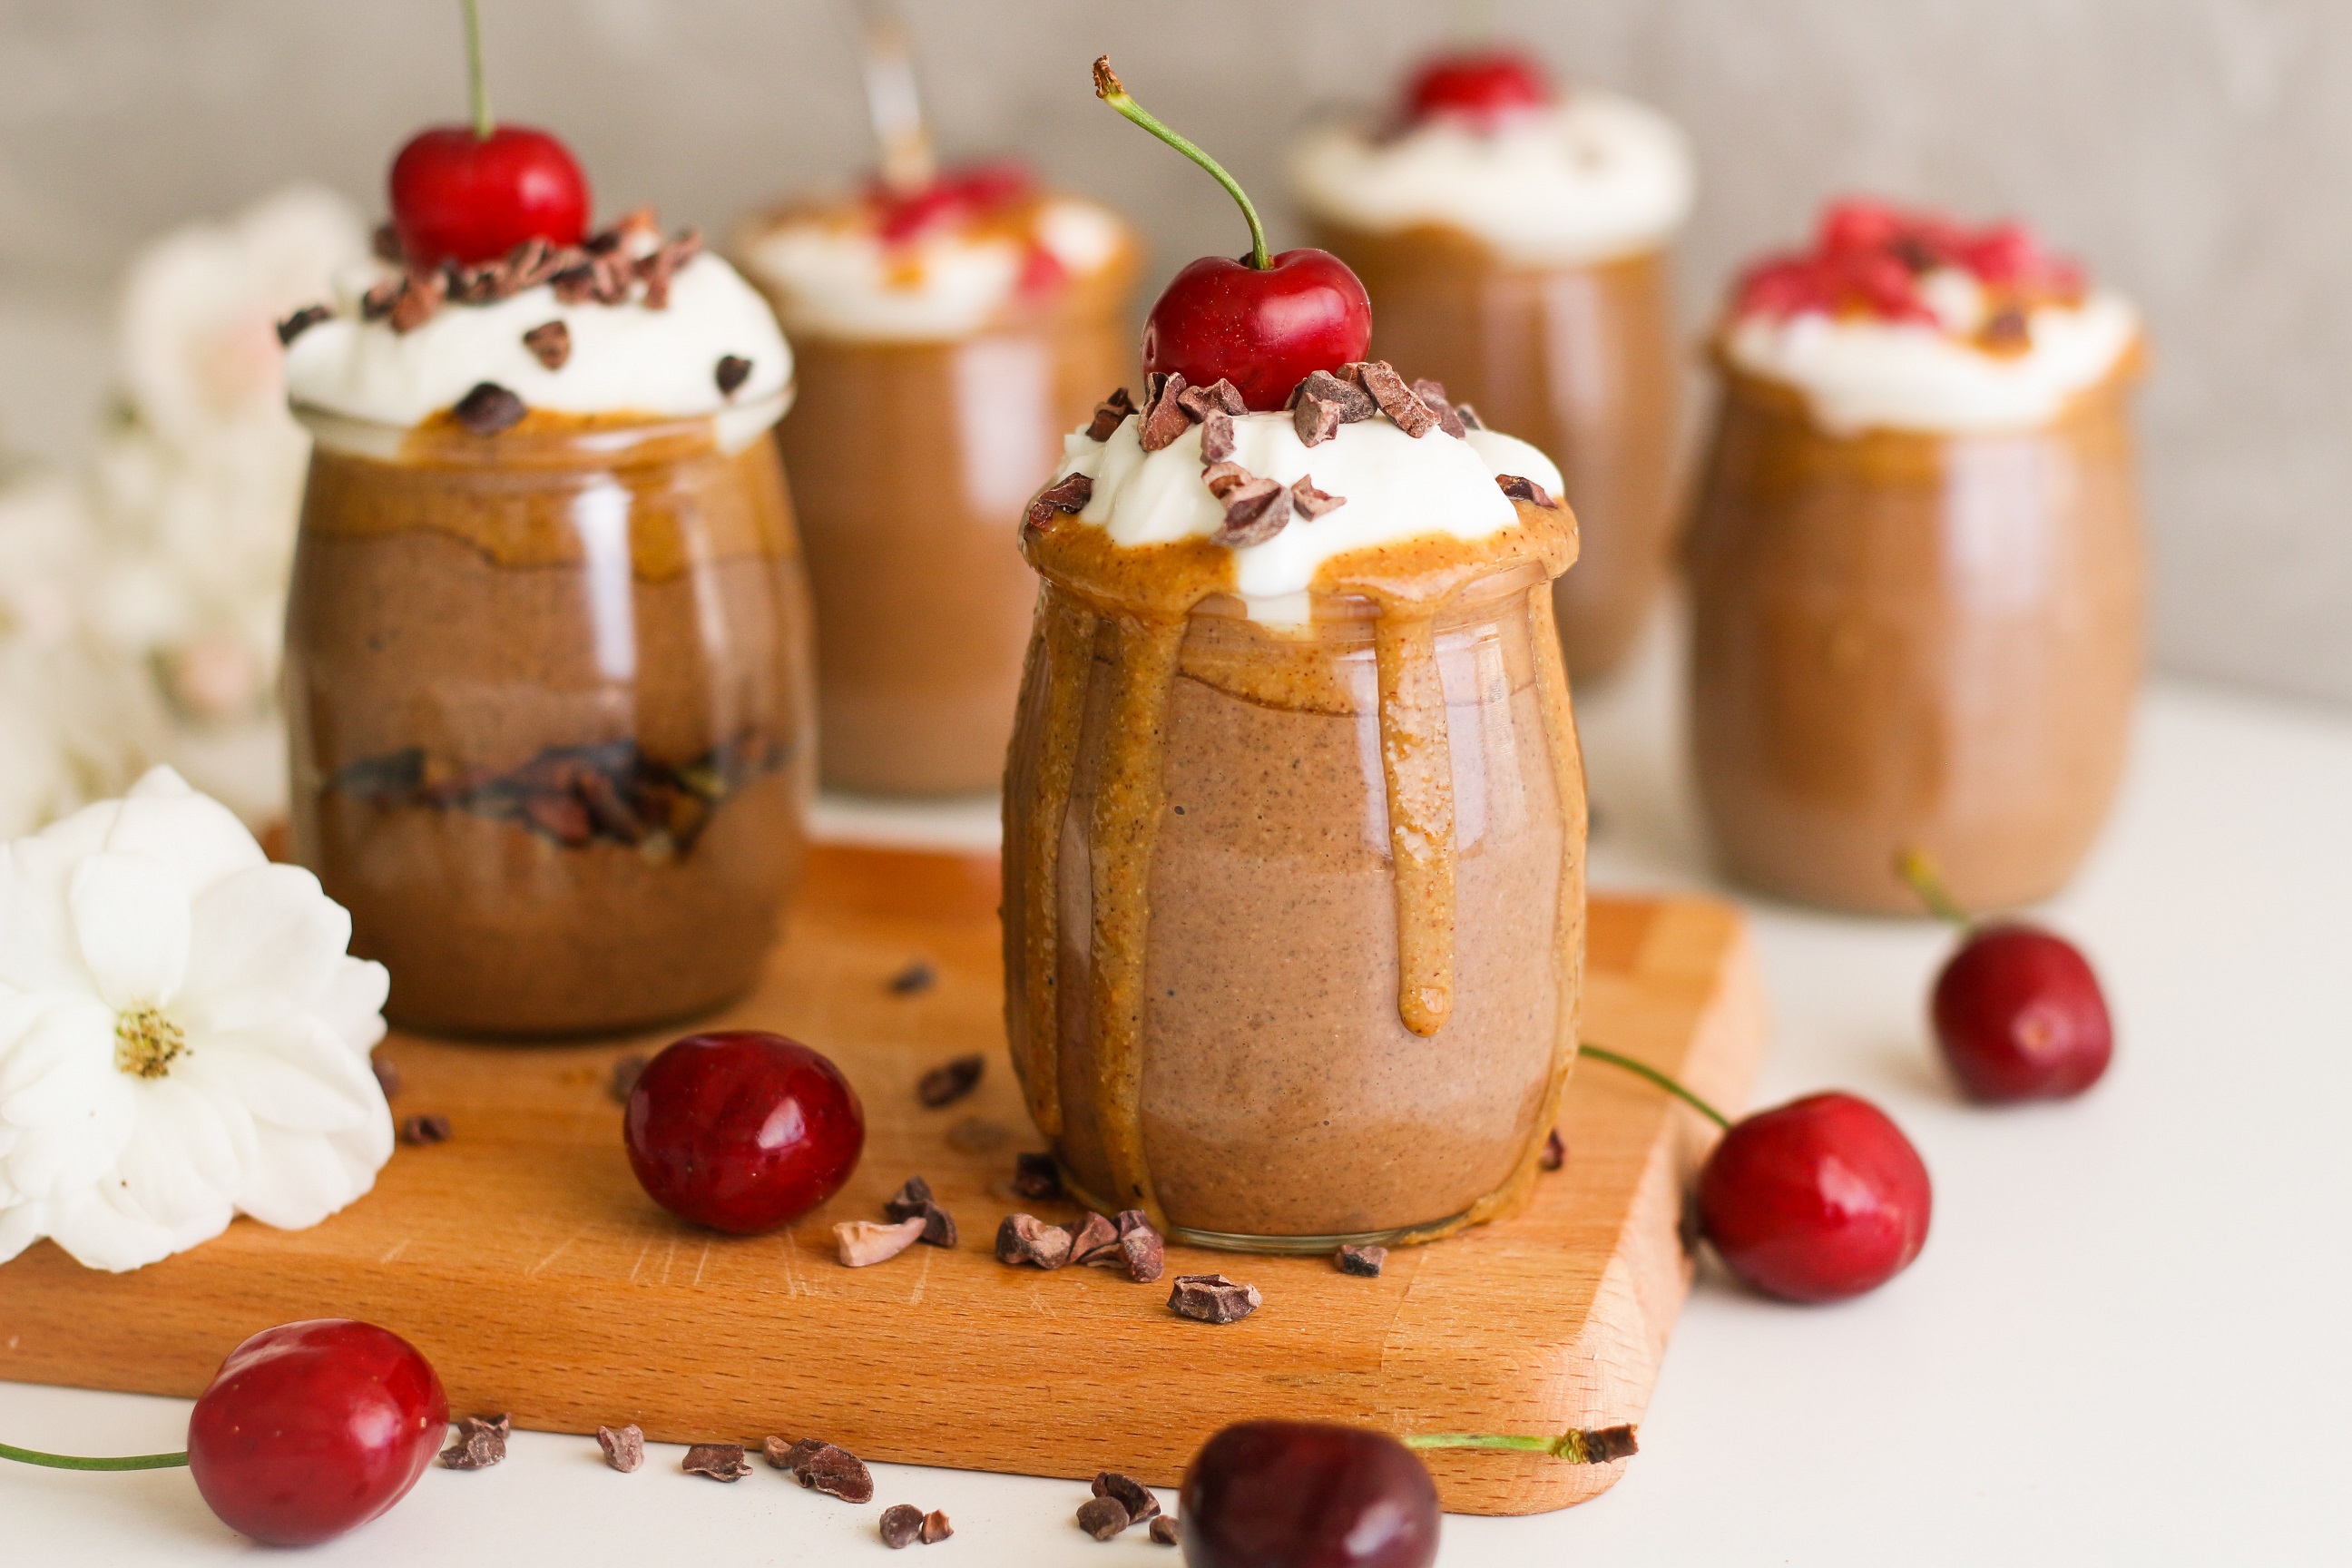 Milk-based chocolate drink with whipped cream and cherry on top